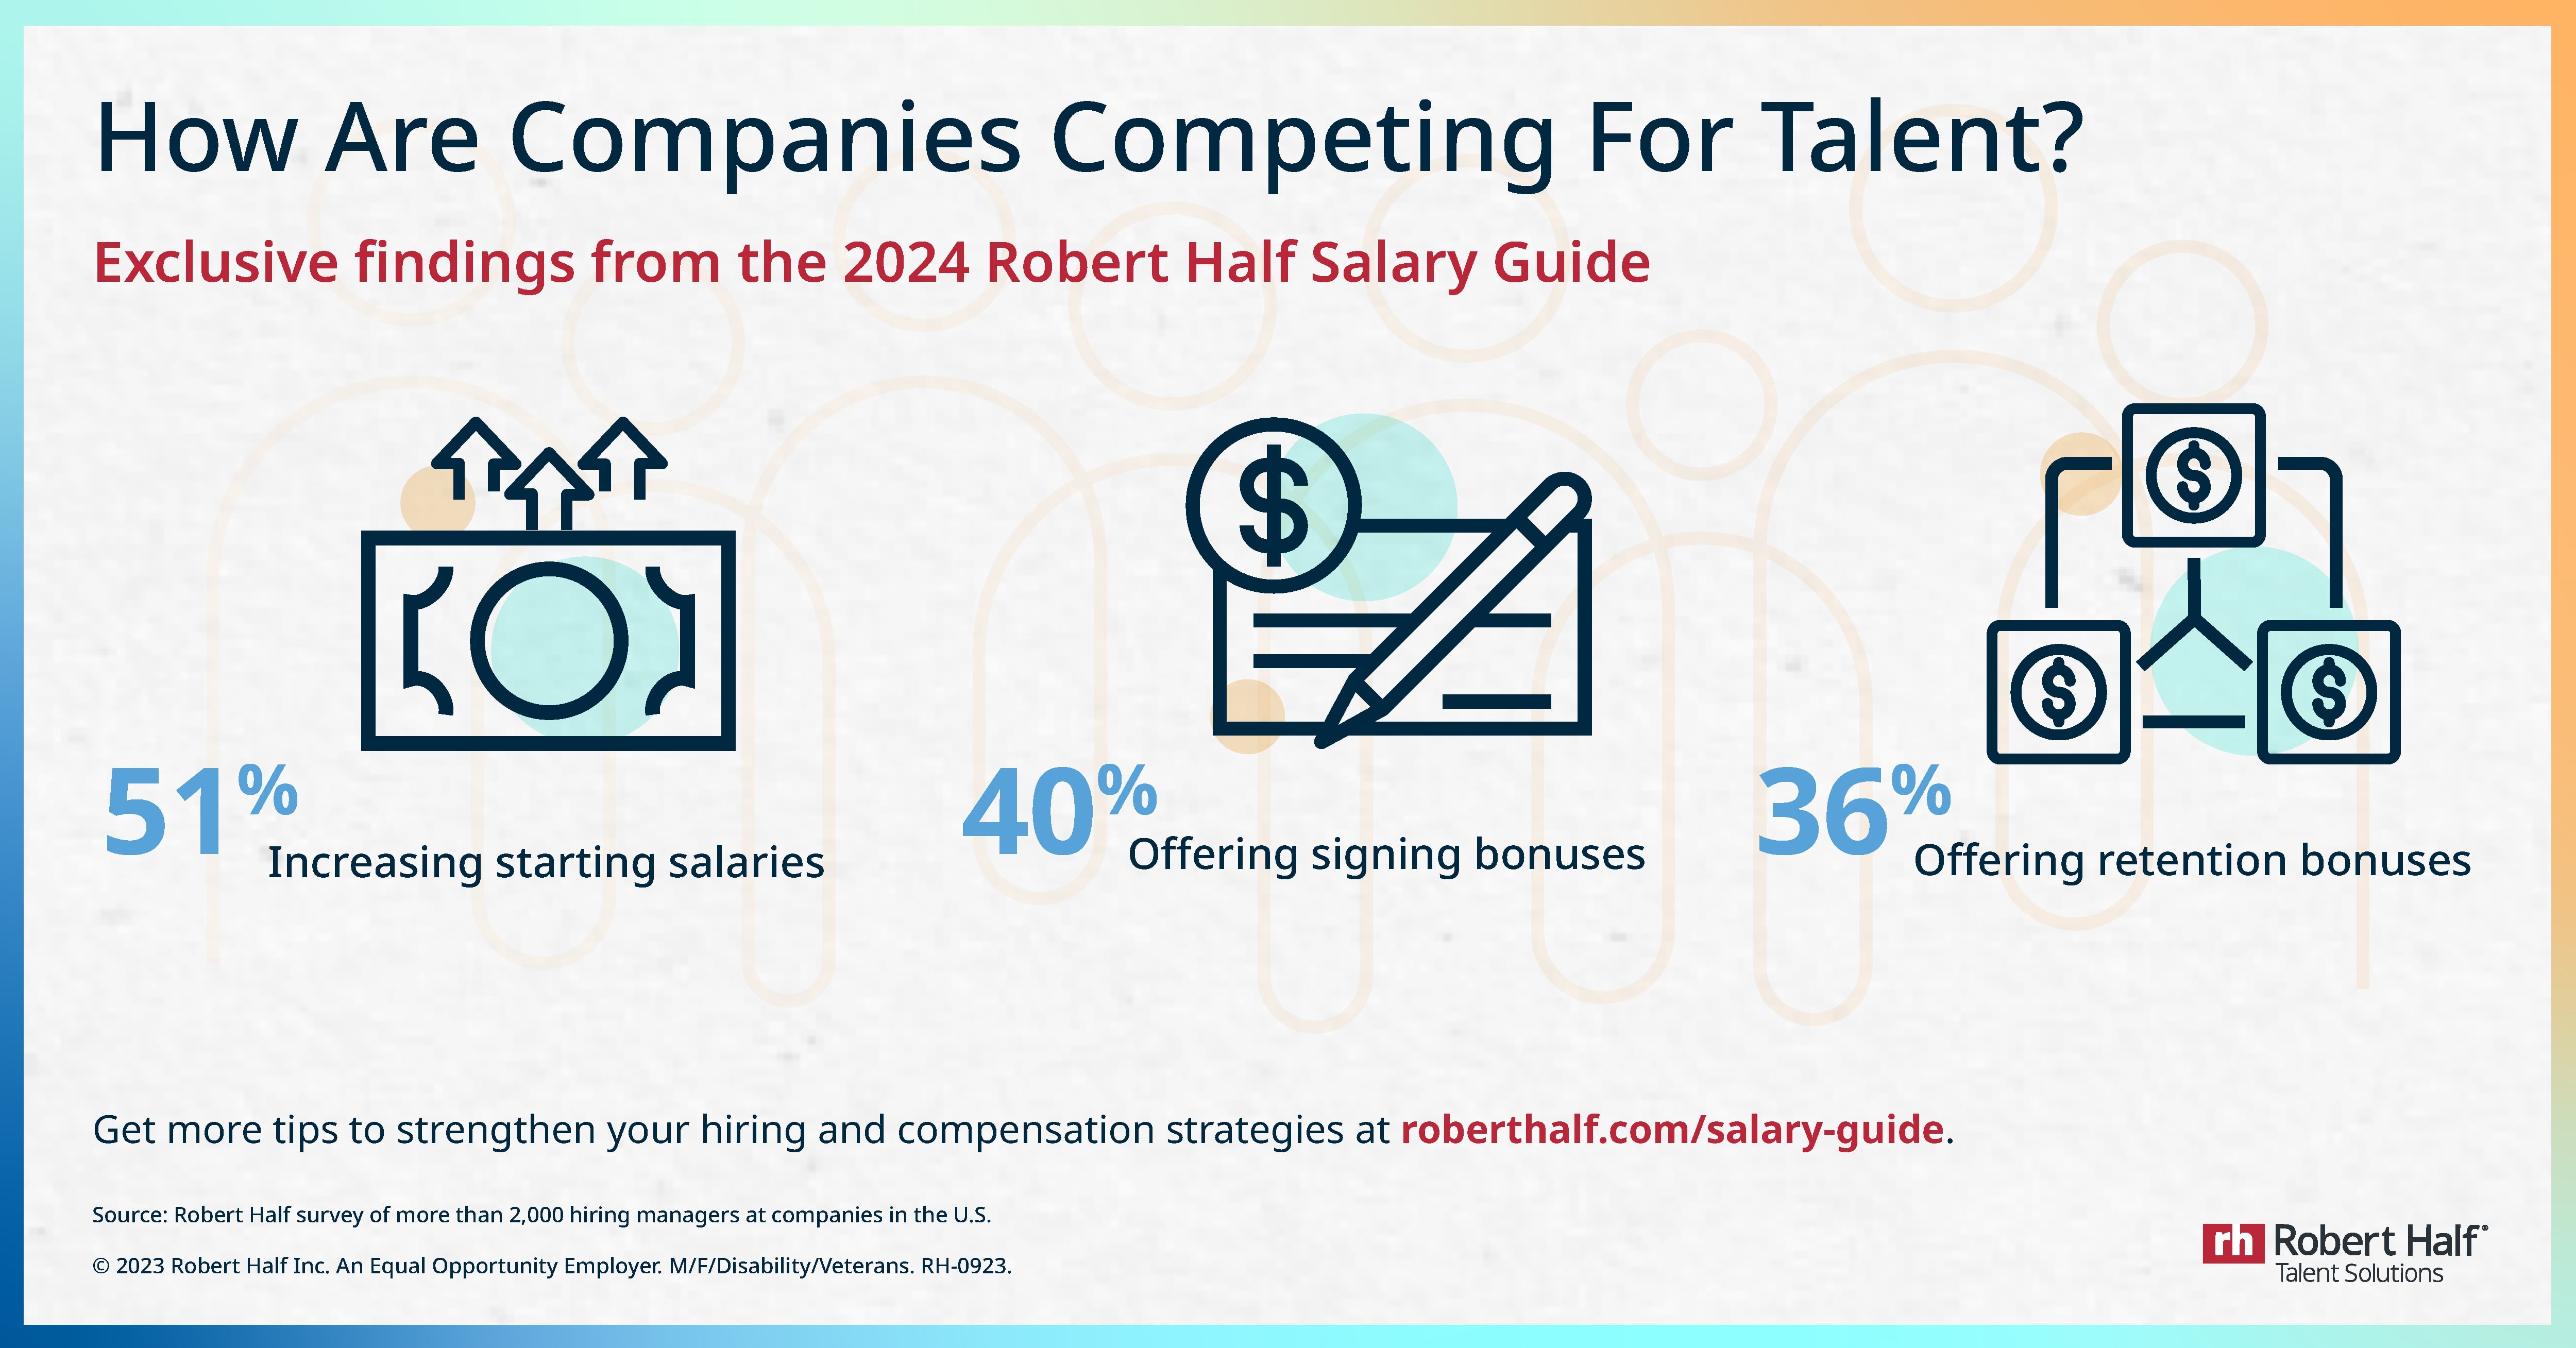 How are companies competing for talent?